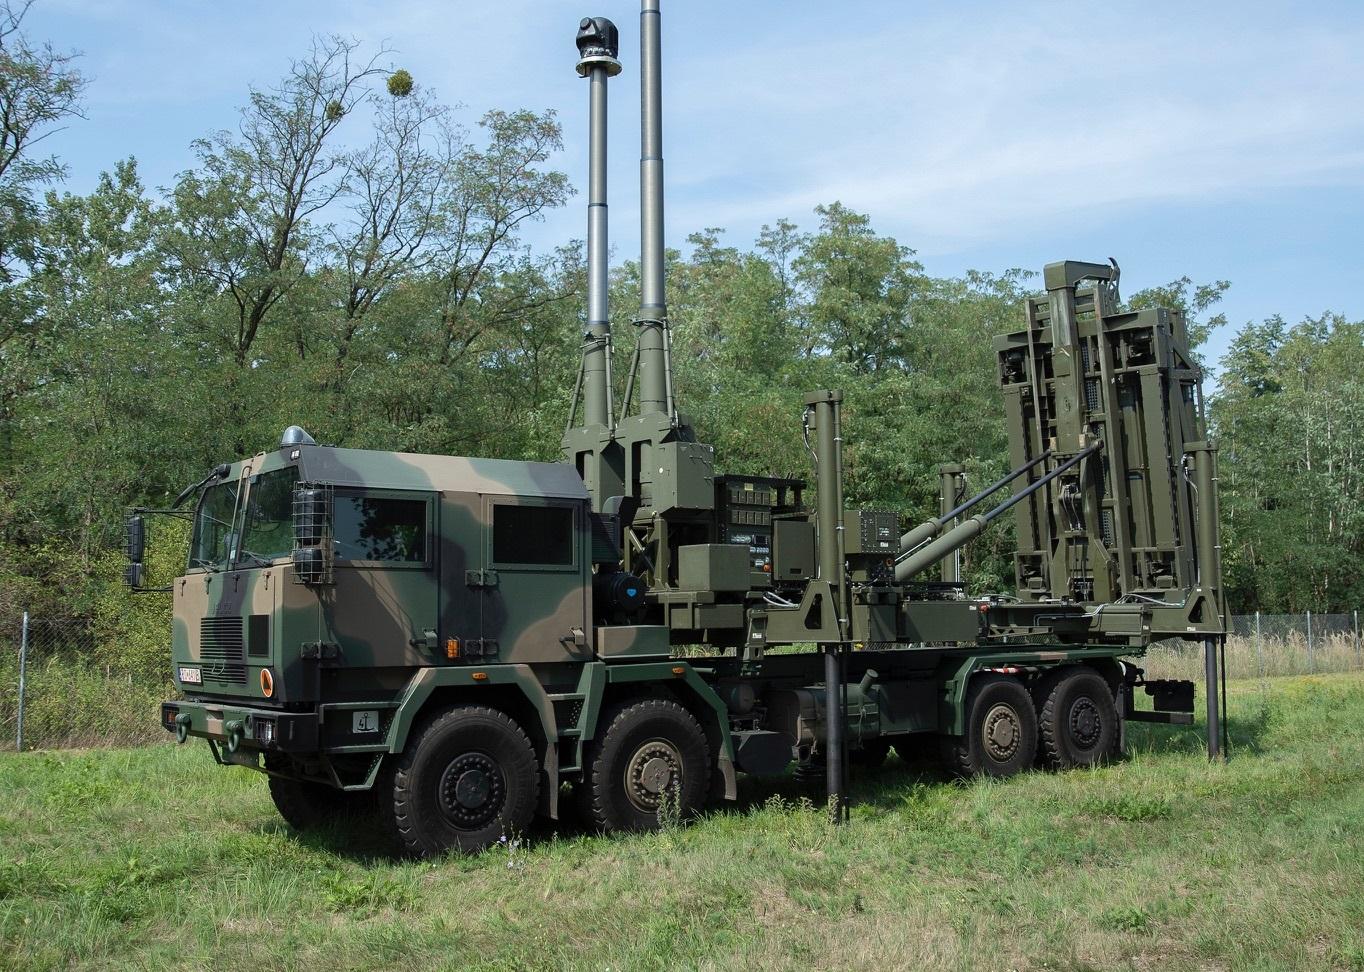 PGZ and MBDA Agreement on Delivery of NAREW System Elements for Polish Army